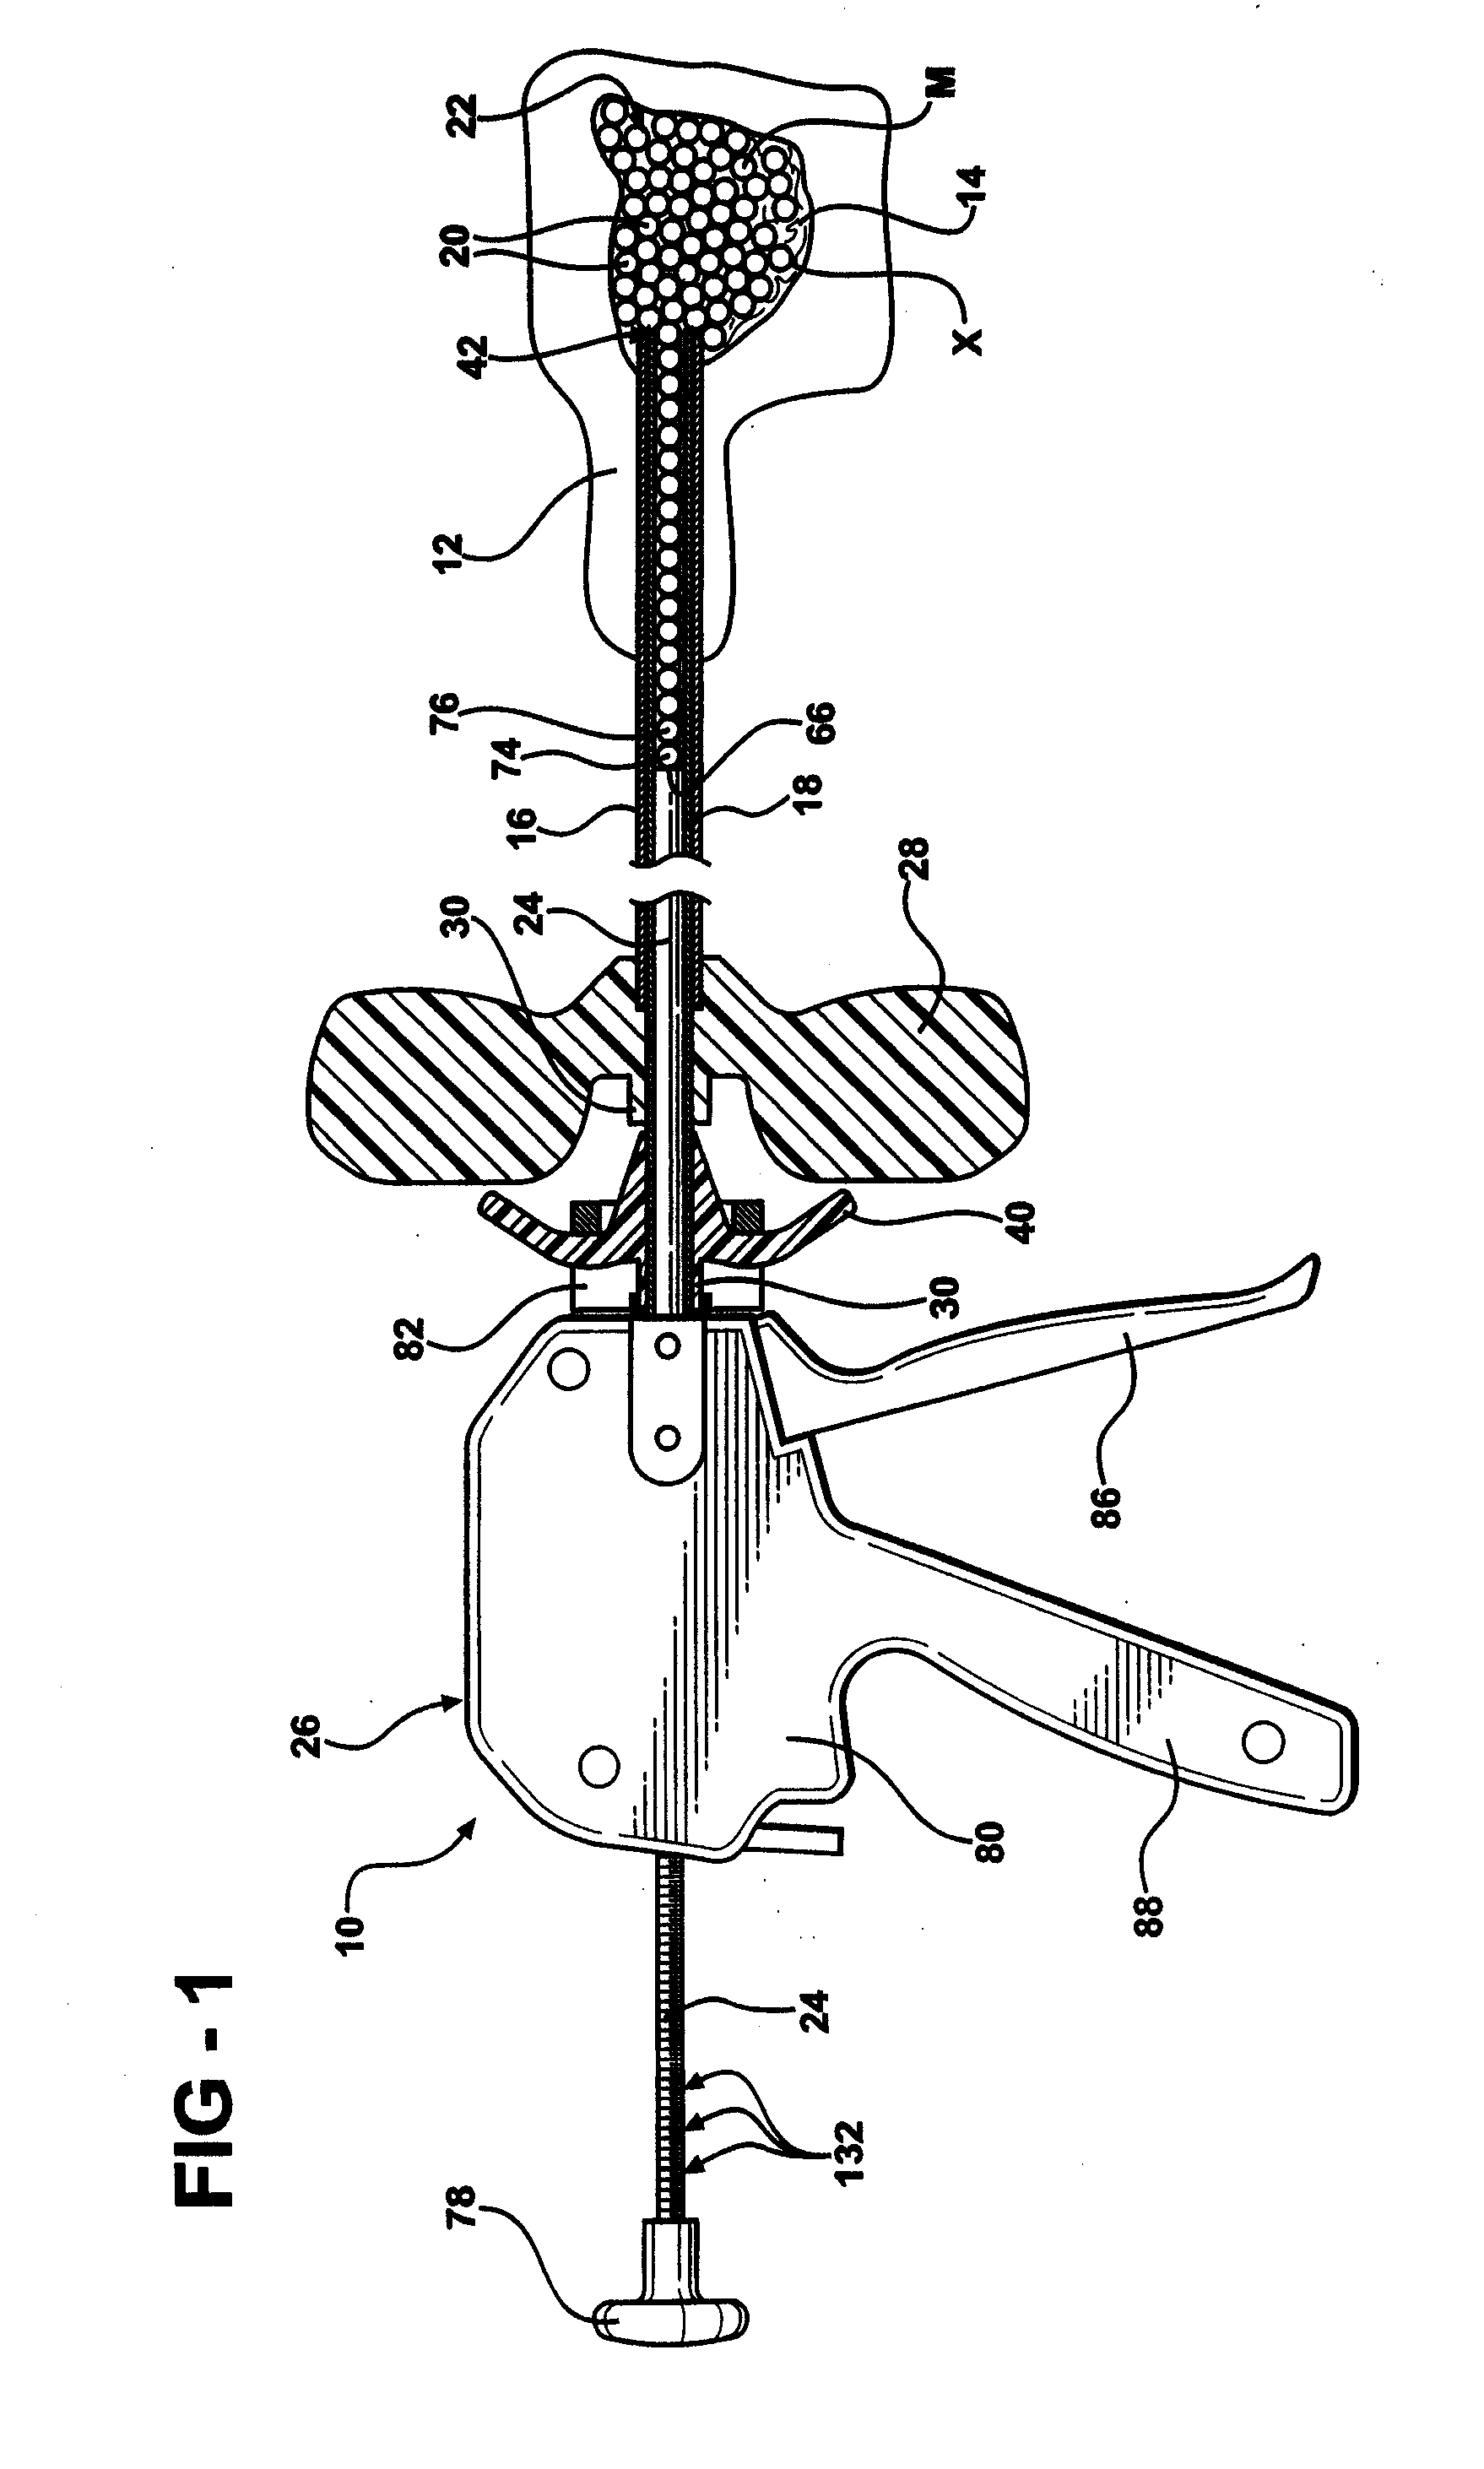 Low pressure delivery system and method for delivering a solid and liquid mixture into a target site for medical treatment